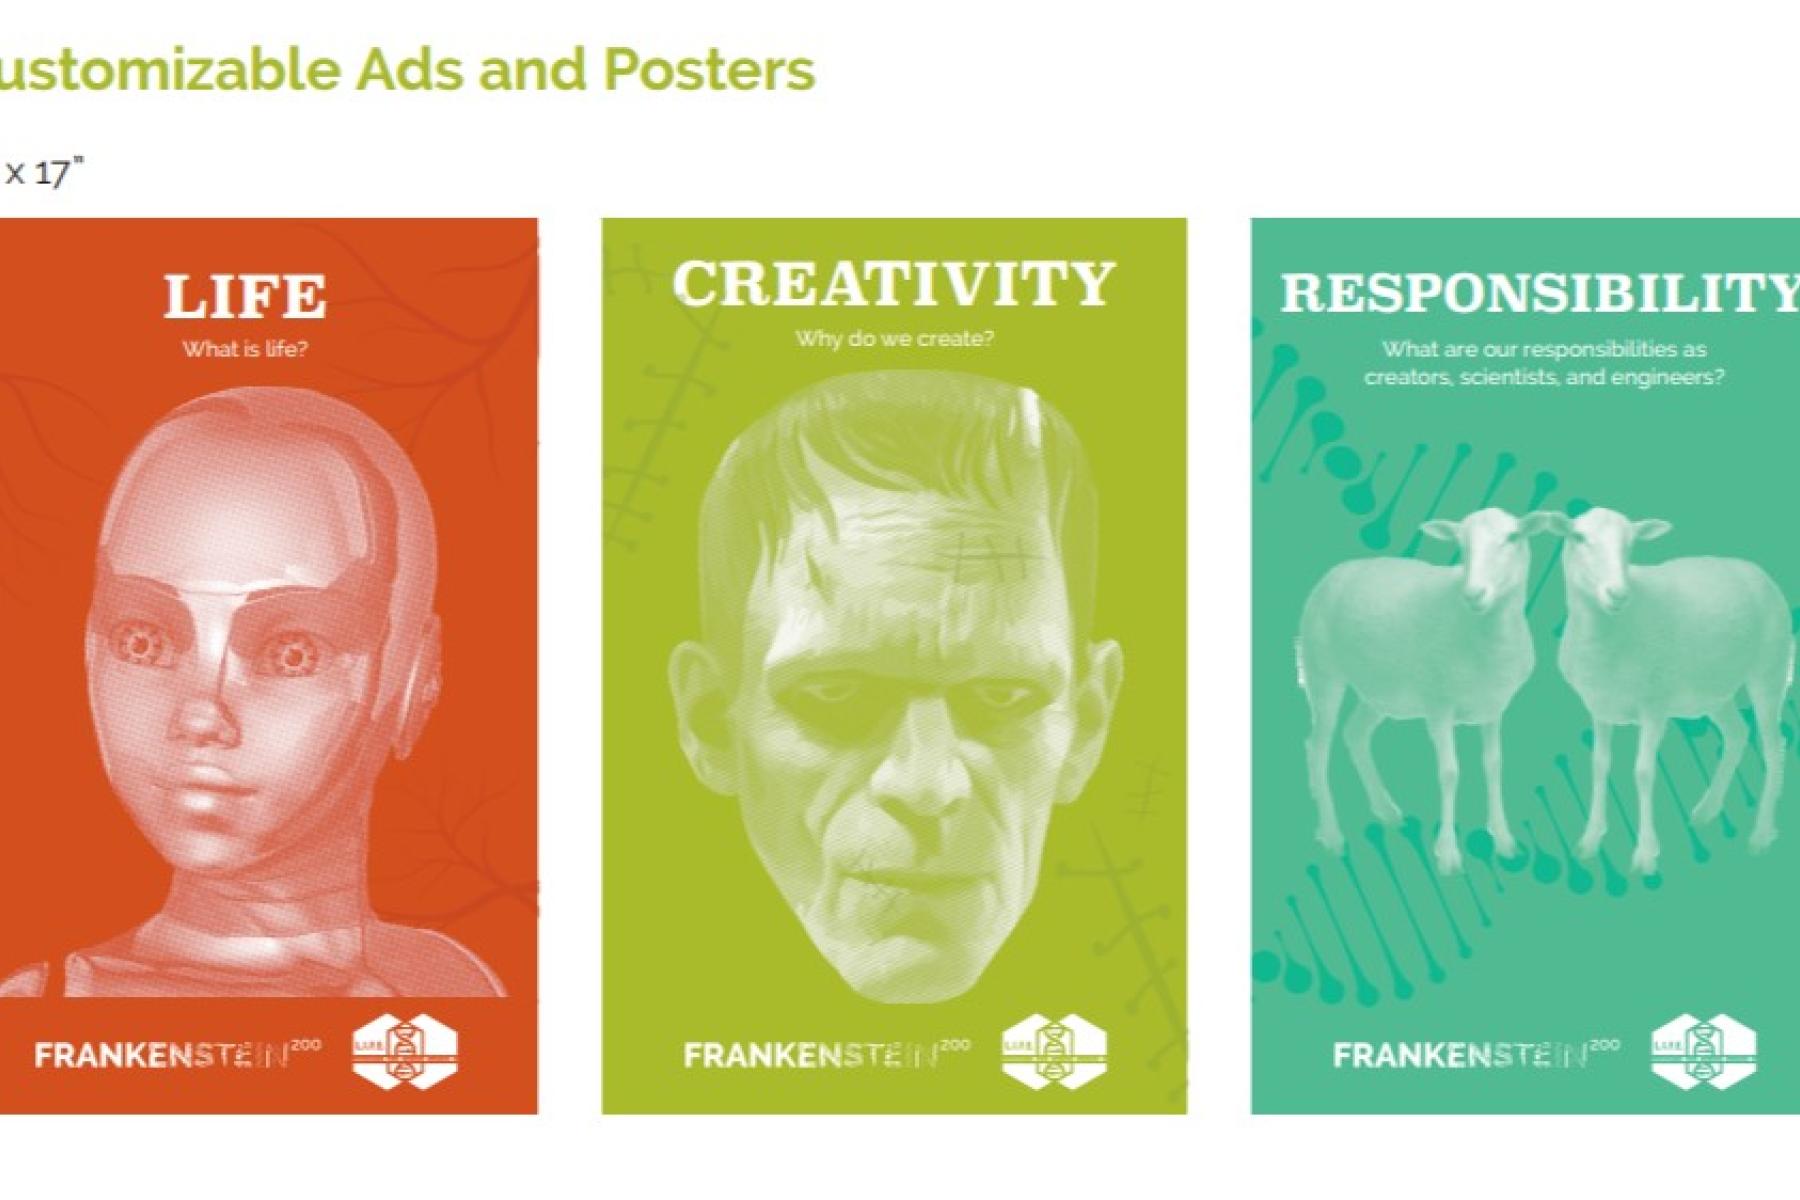 A screen shot of multiple promotional posters in various art styles, one poster depicts a robot, another depicts Frankenstein's monster, and the last one depicts a sheep and it's clone